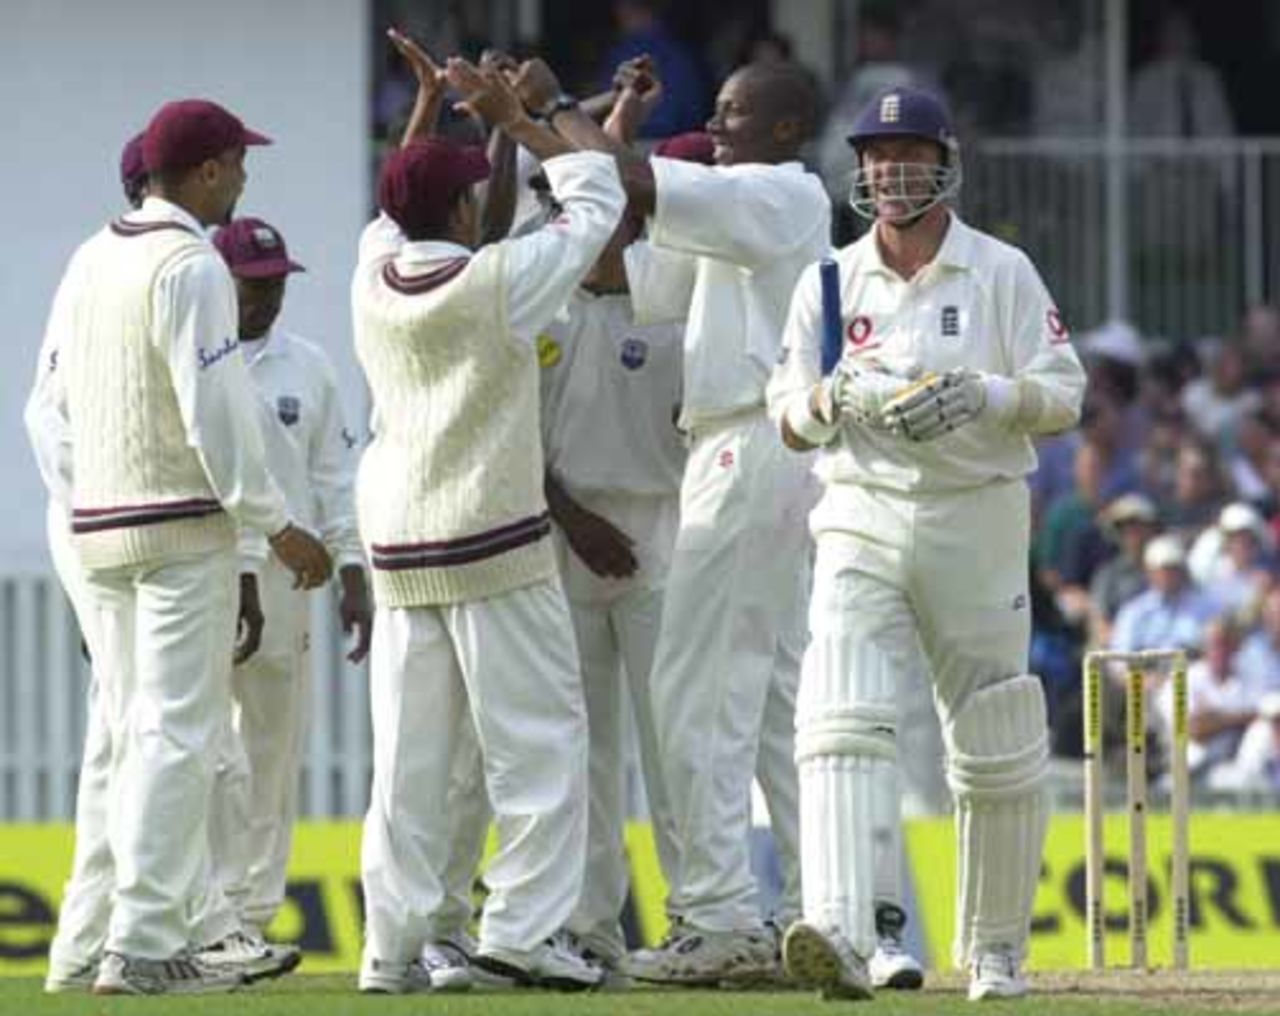 England v West Indies at the Oval 2000